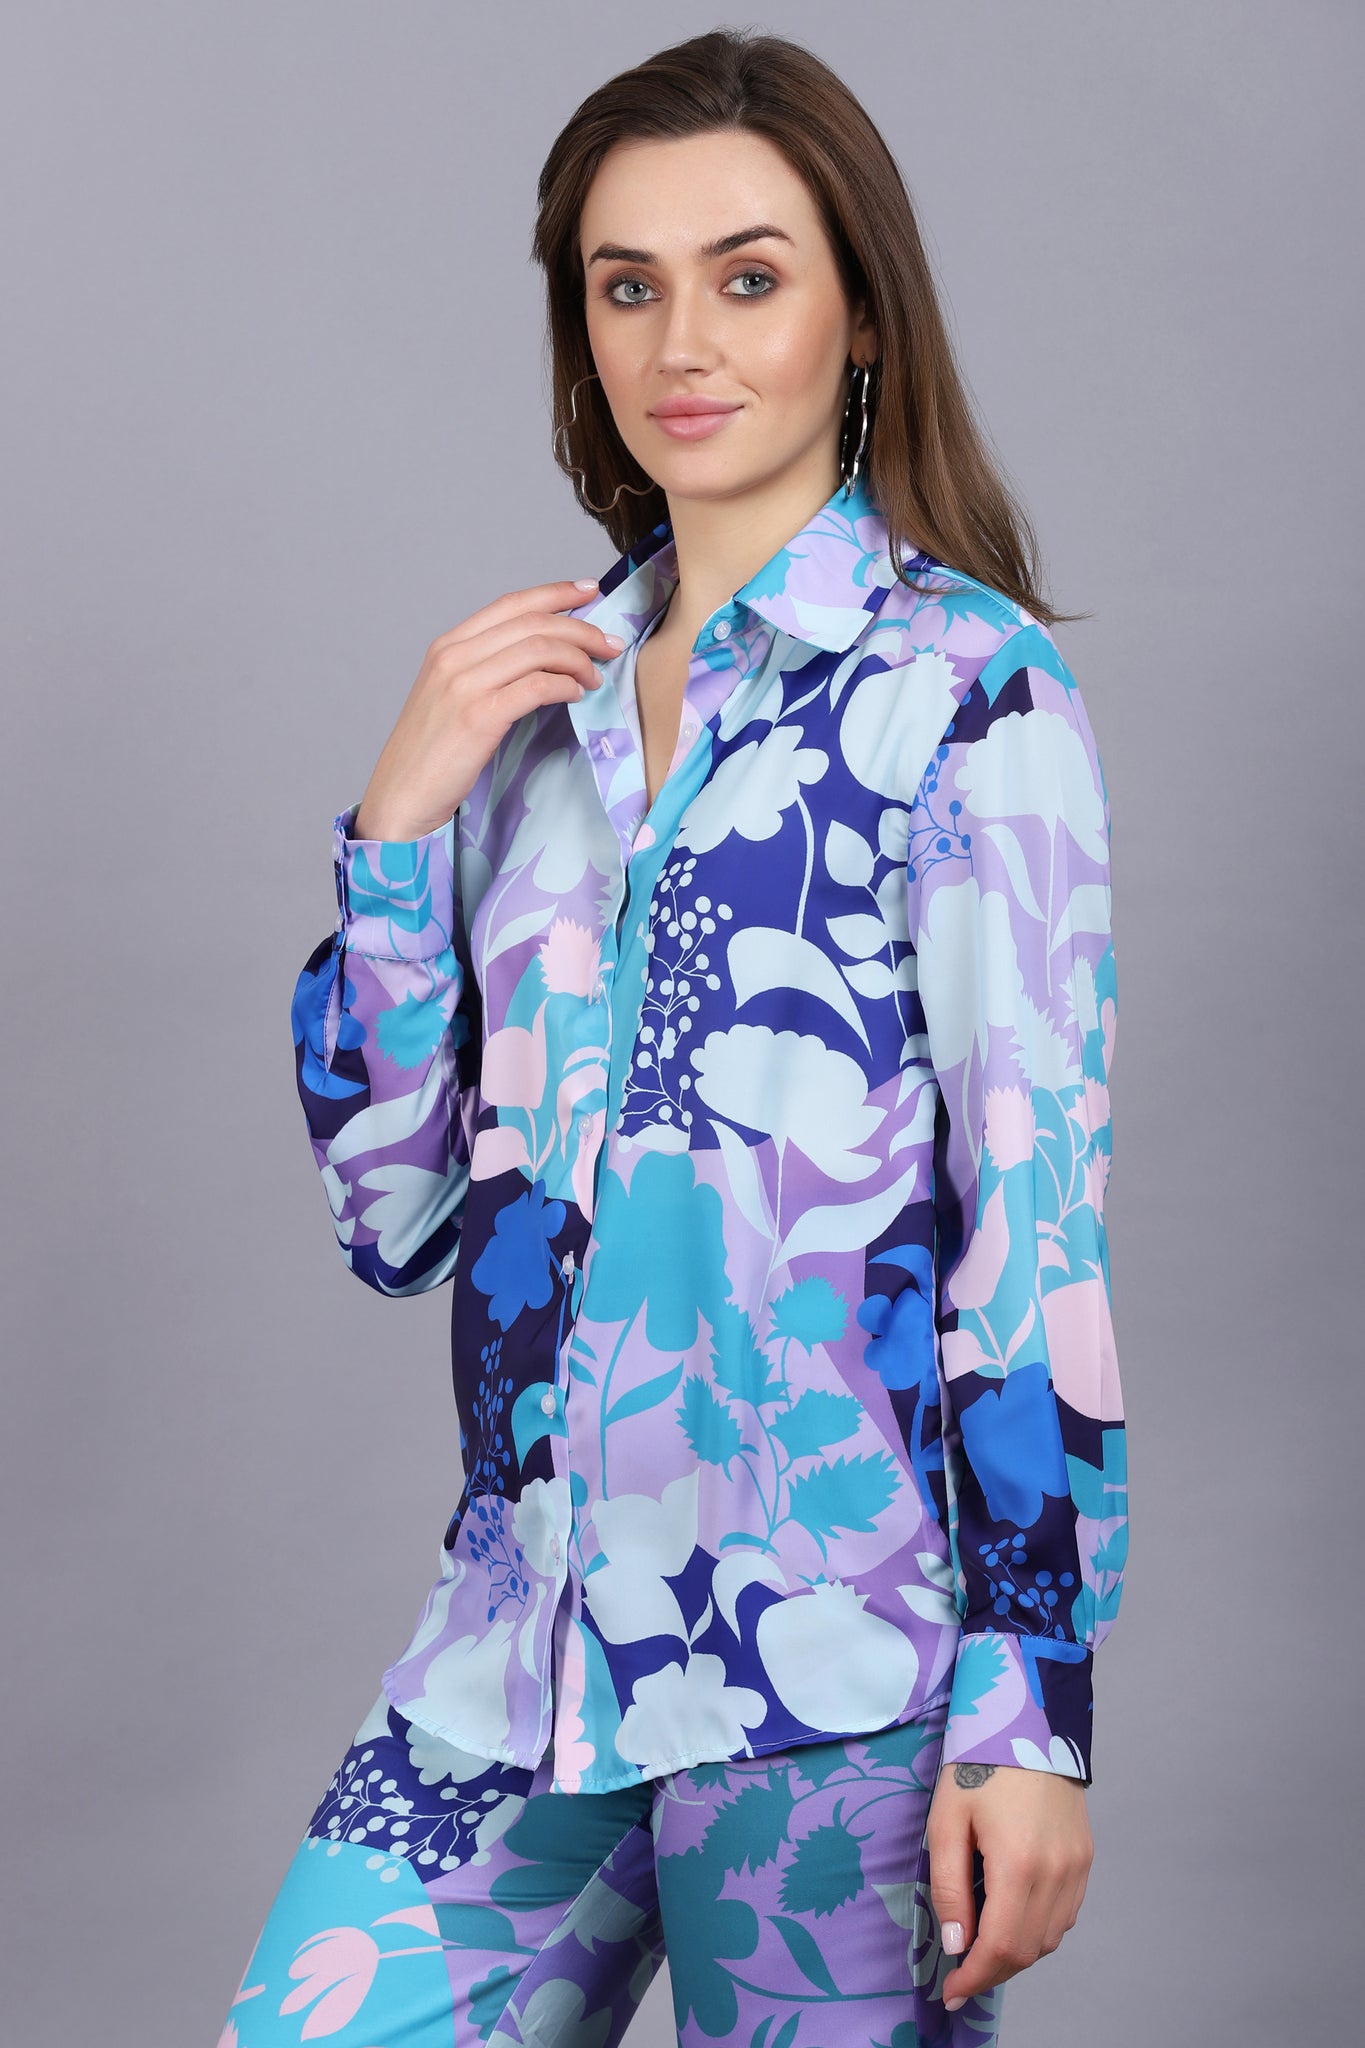 Charming Floral Shirt For Women